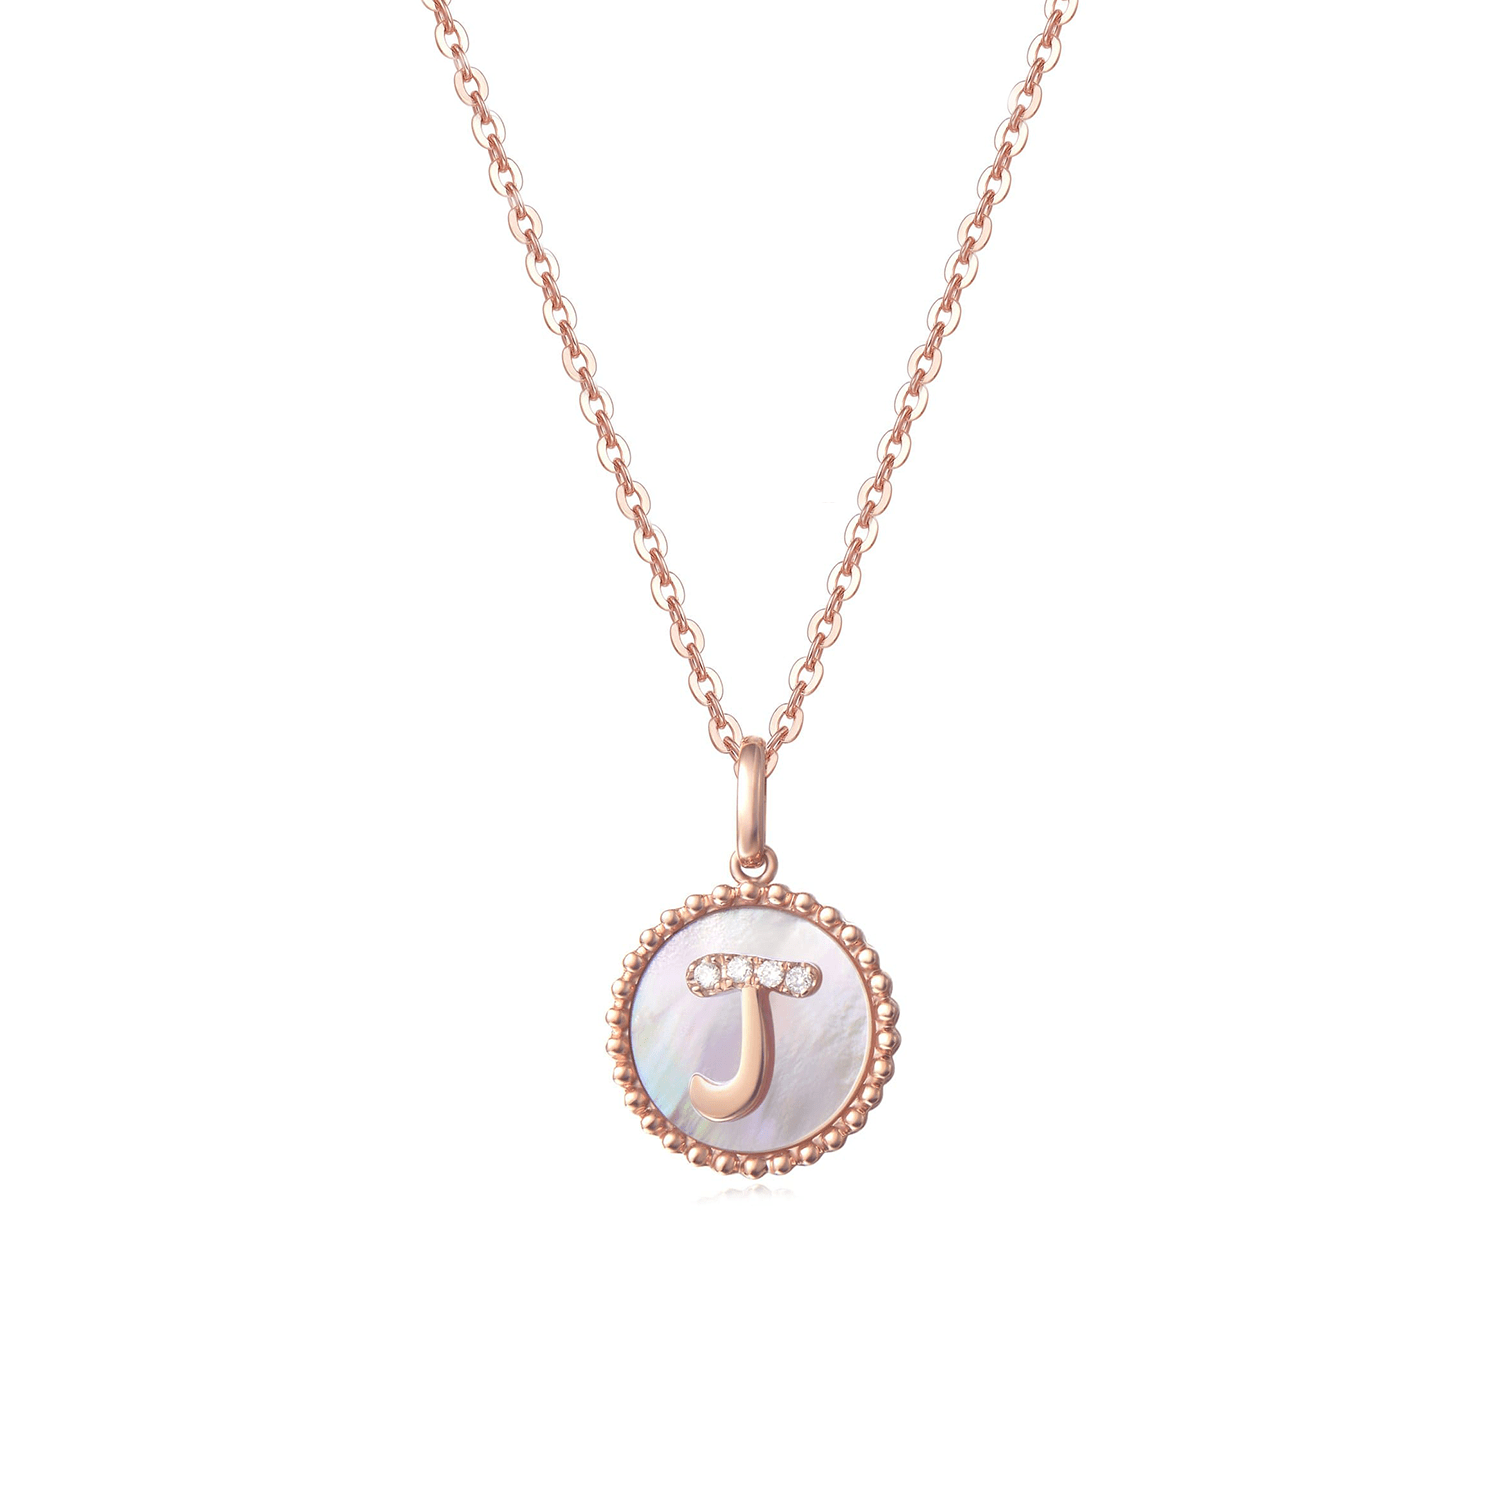 FANCIME "J" Initial Dainty Solid 14K Rose Gold Necklace Main